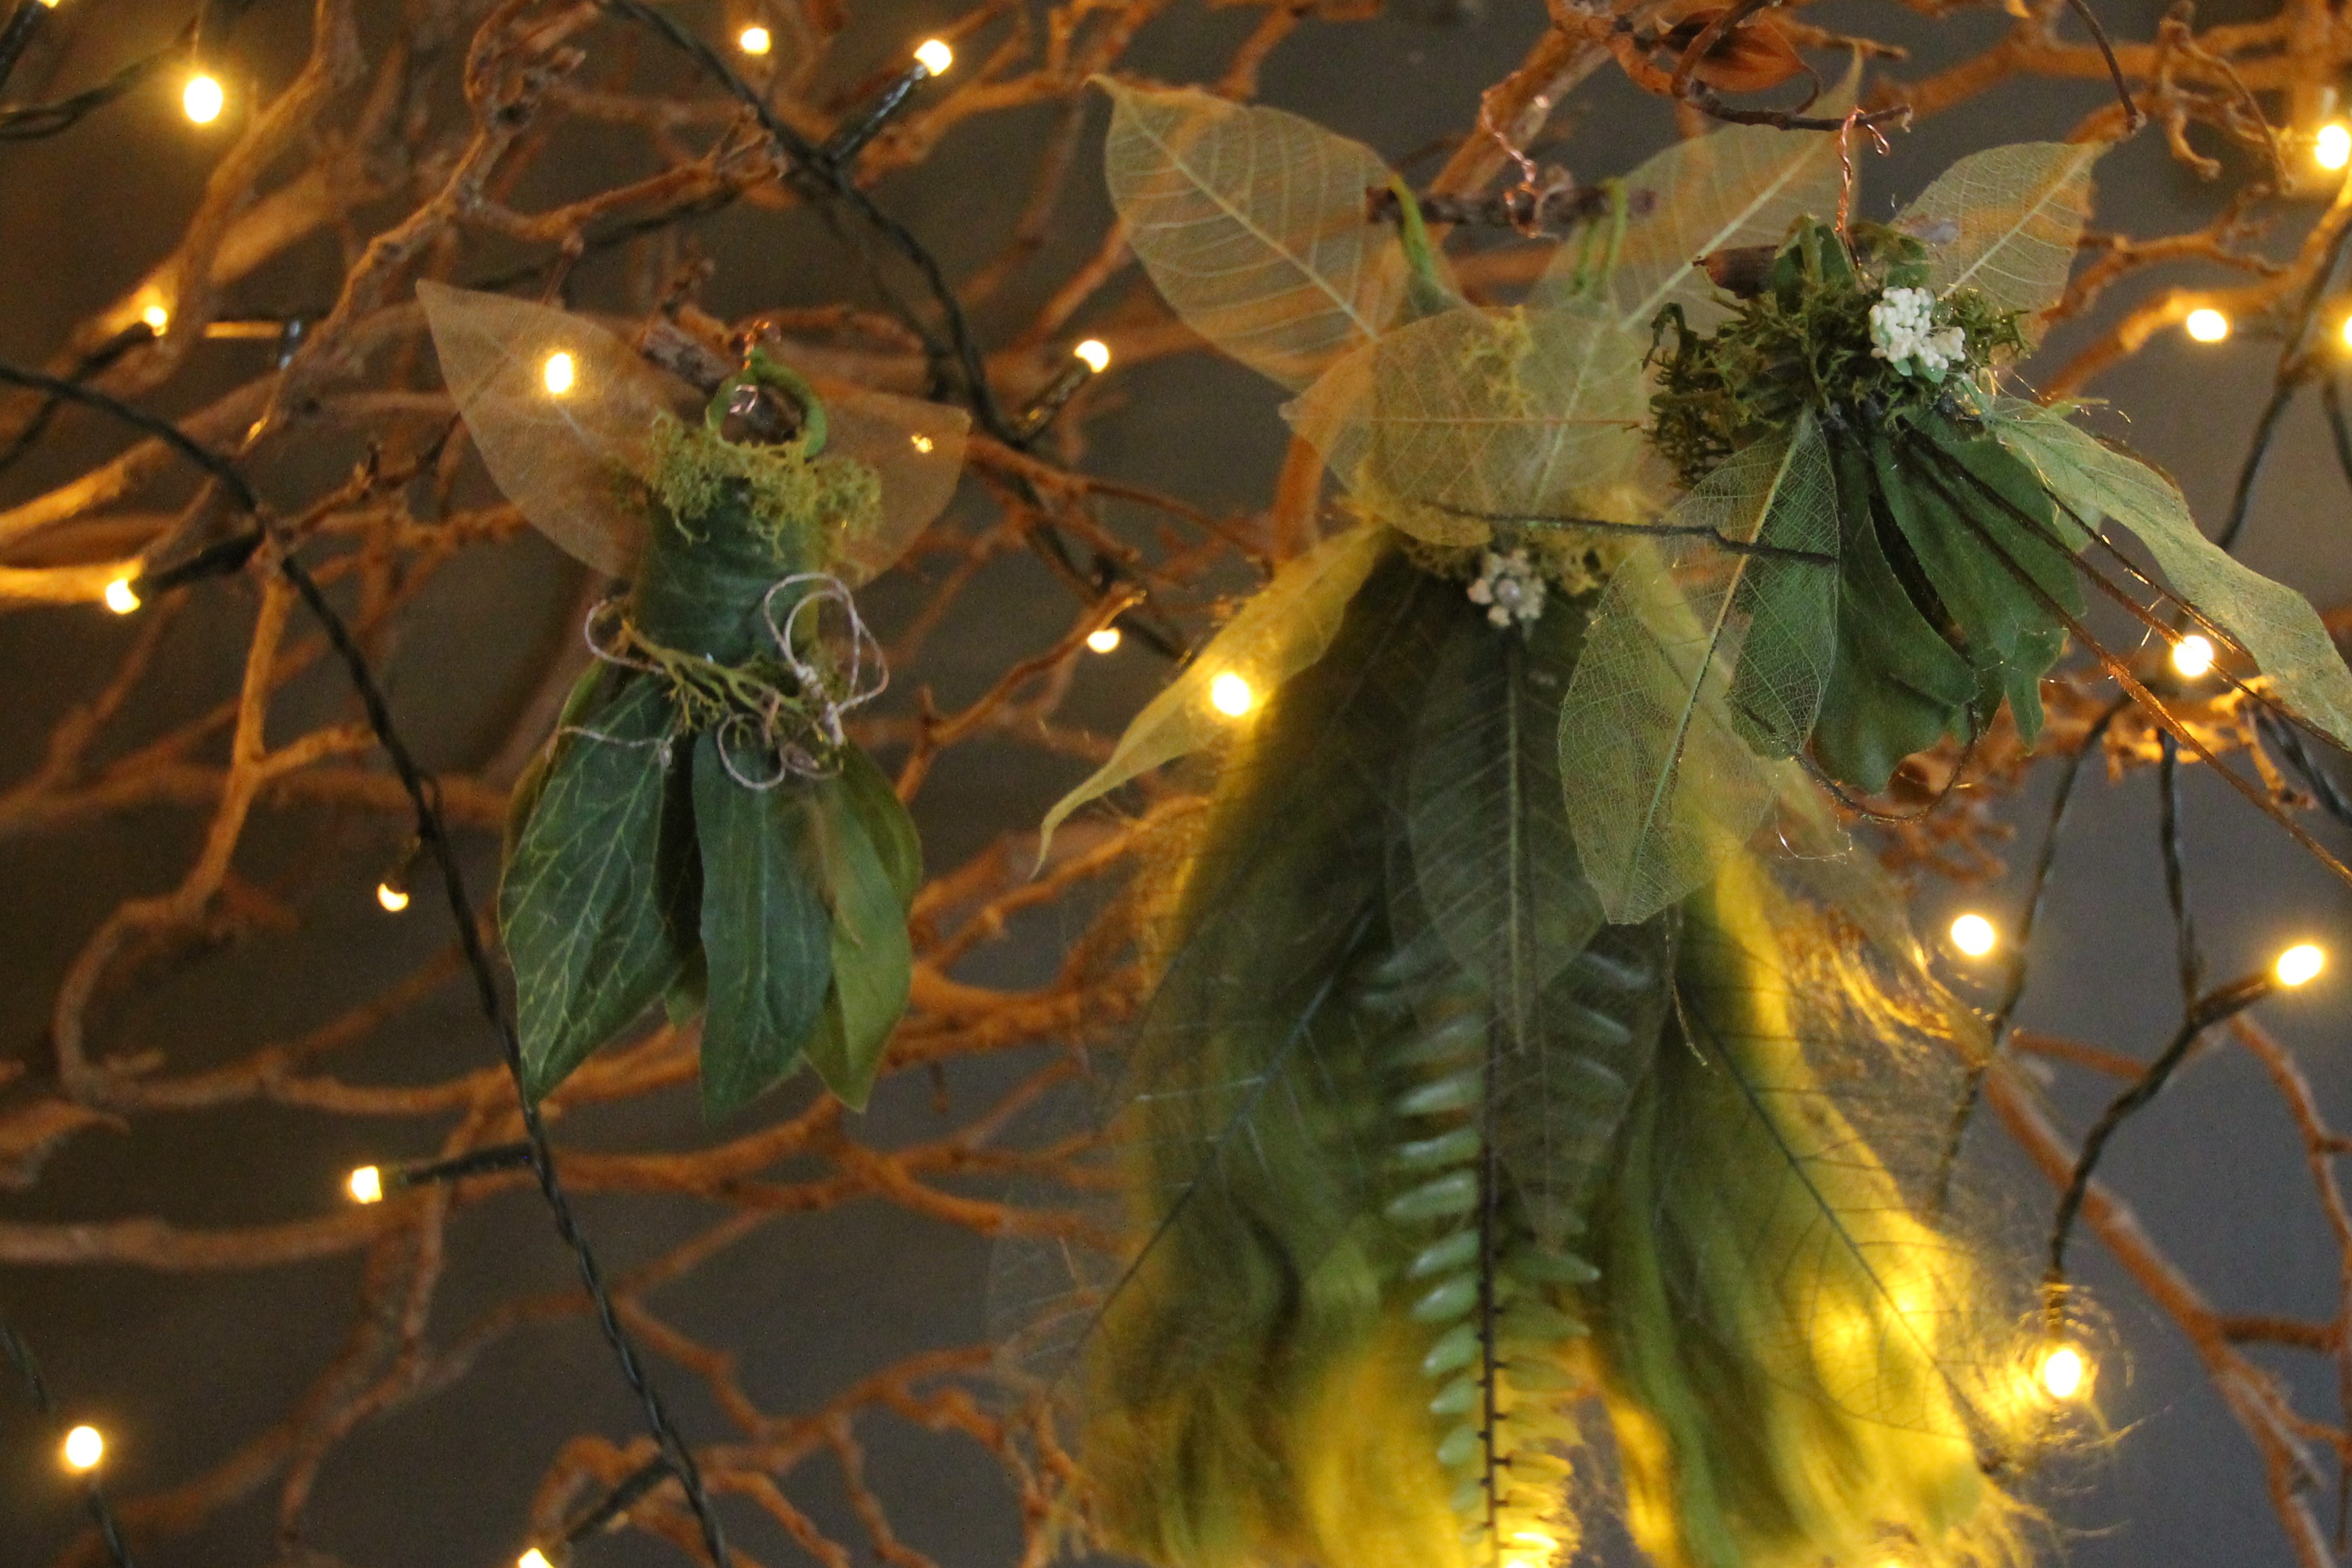 Three fairy dresses made from leaves